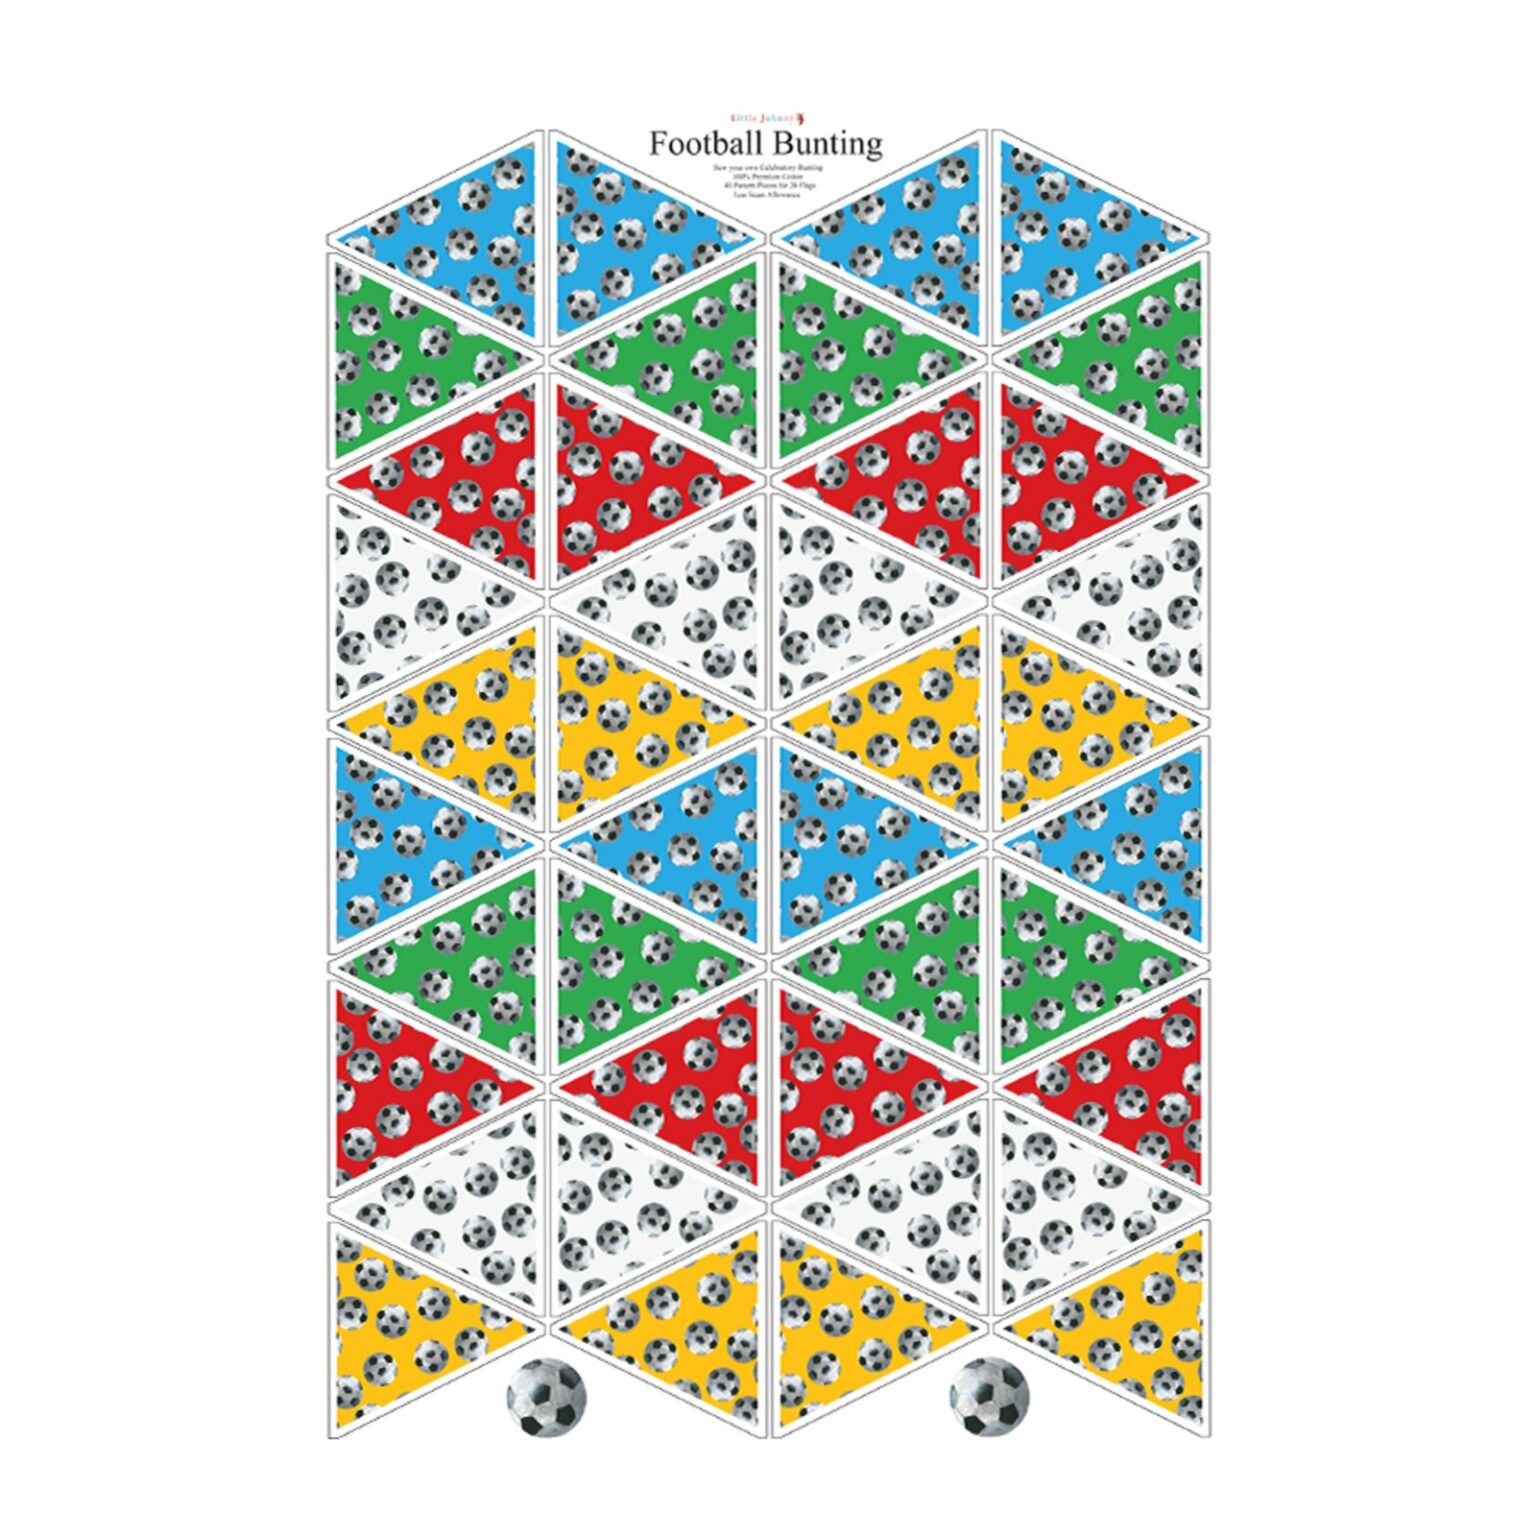 bunting cotton panel | More Sewing